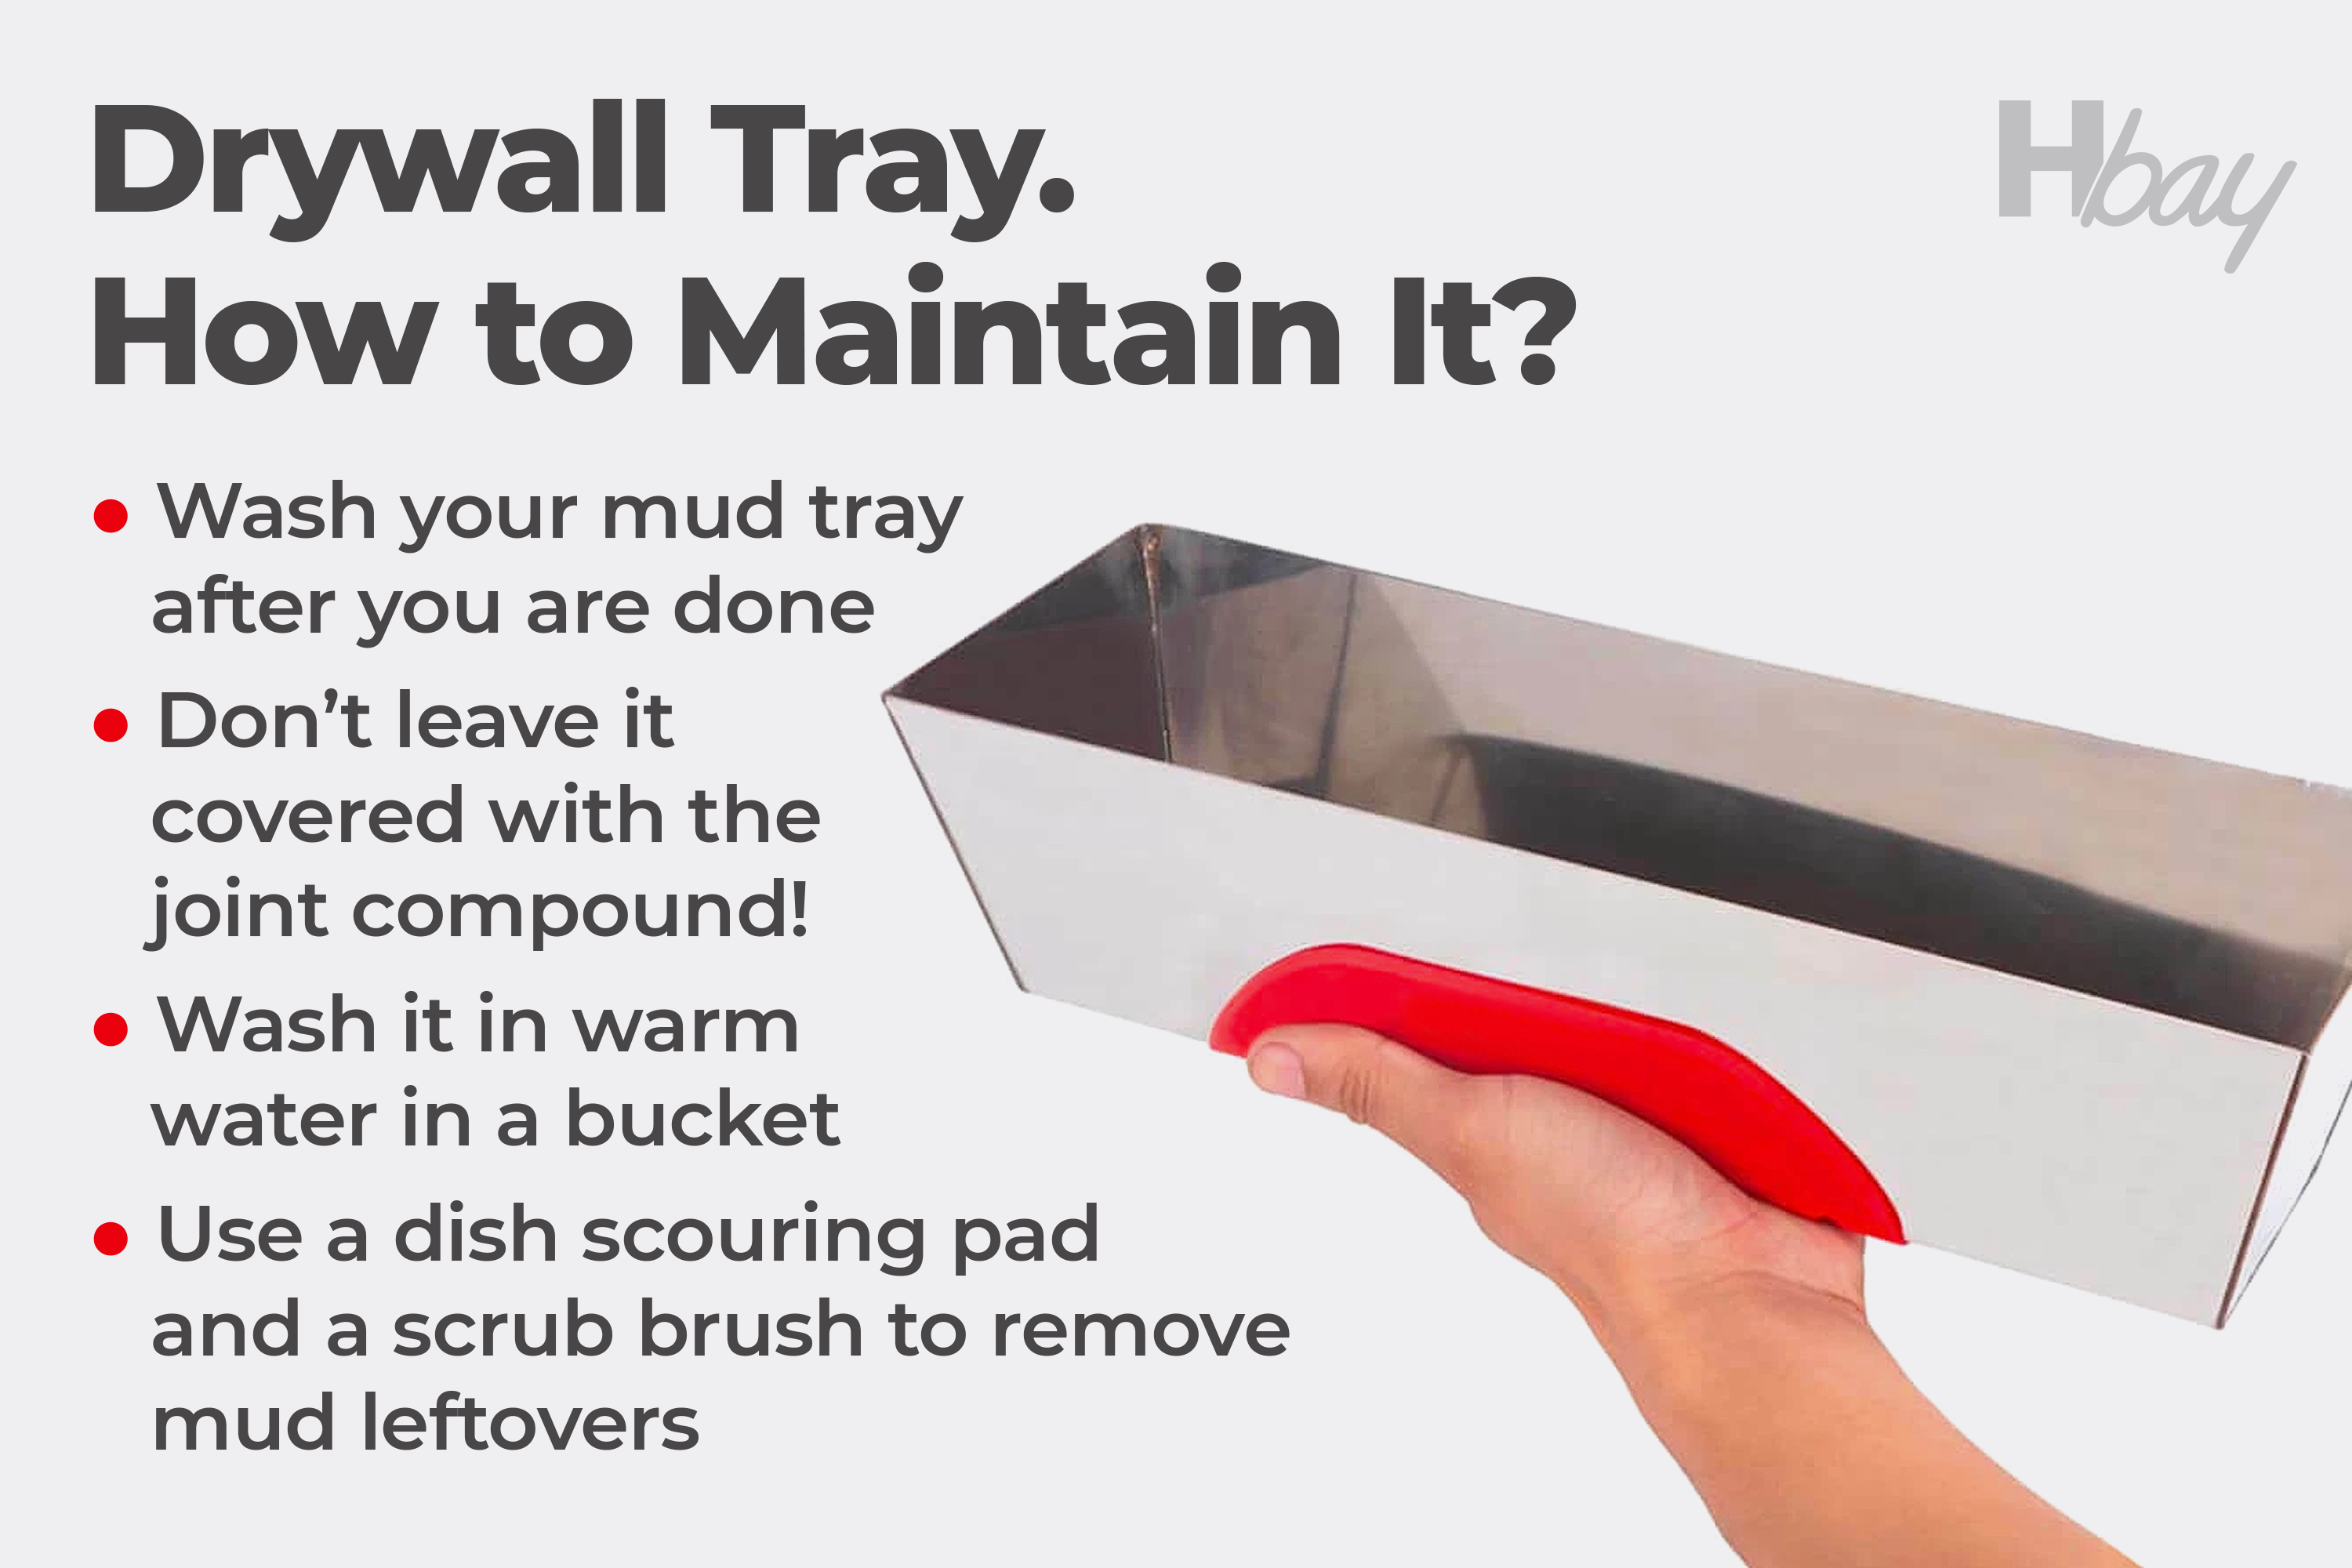 A Drywall Tray. How to Maintain It